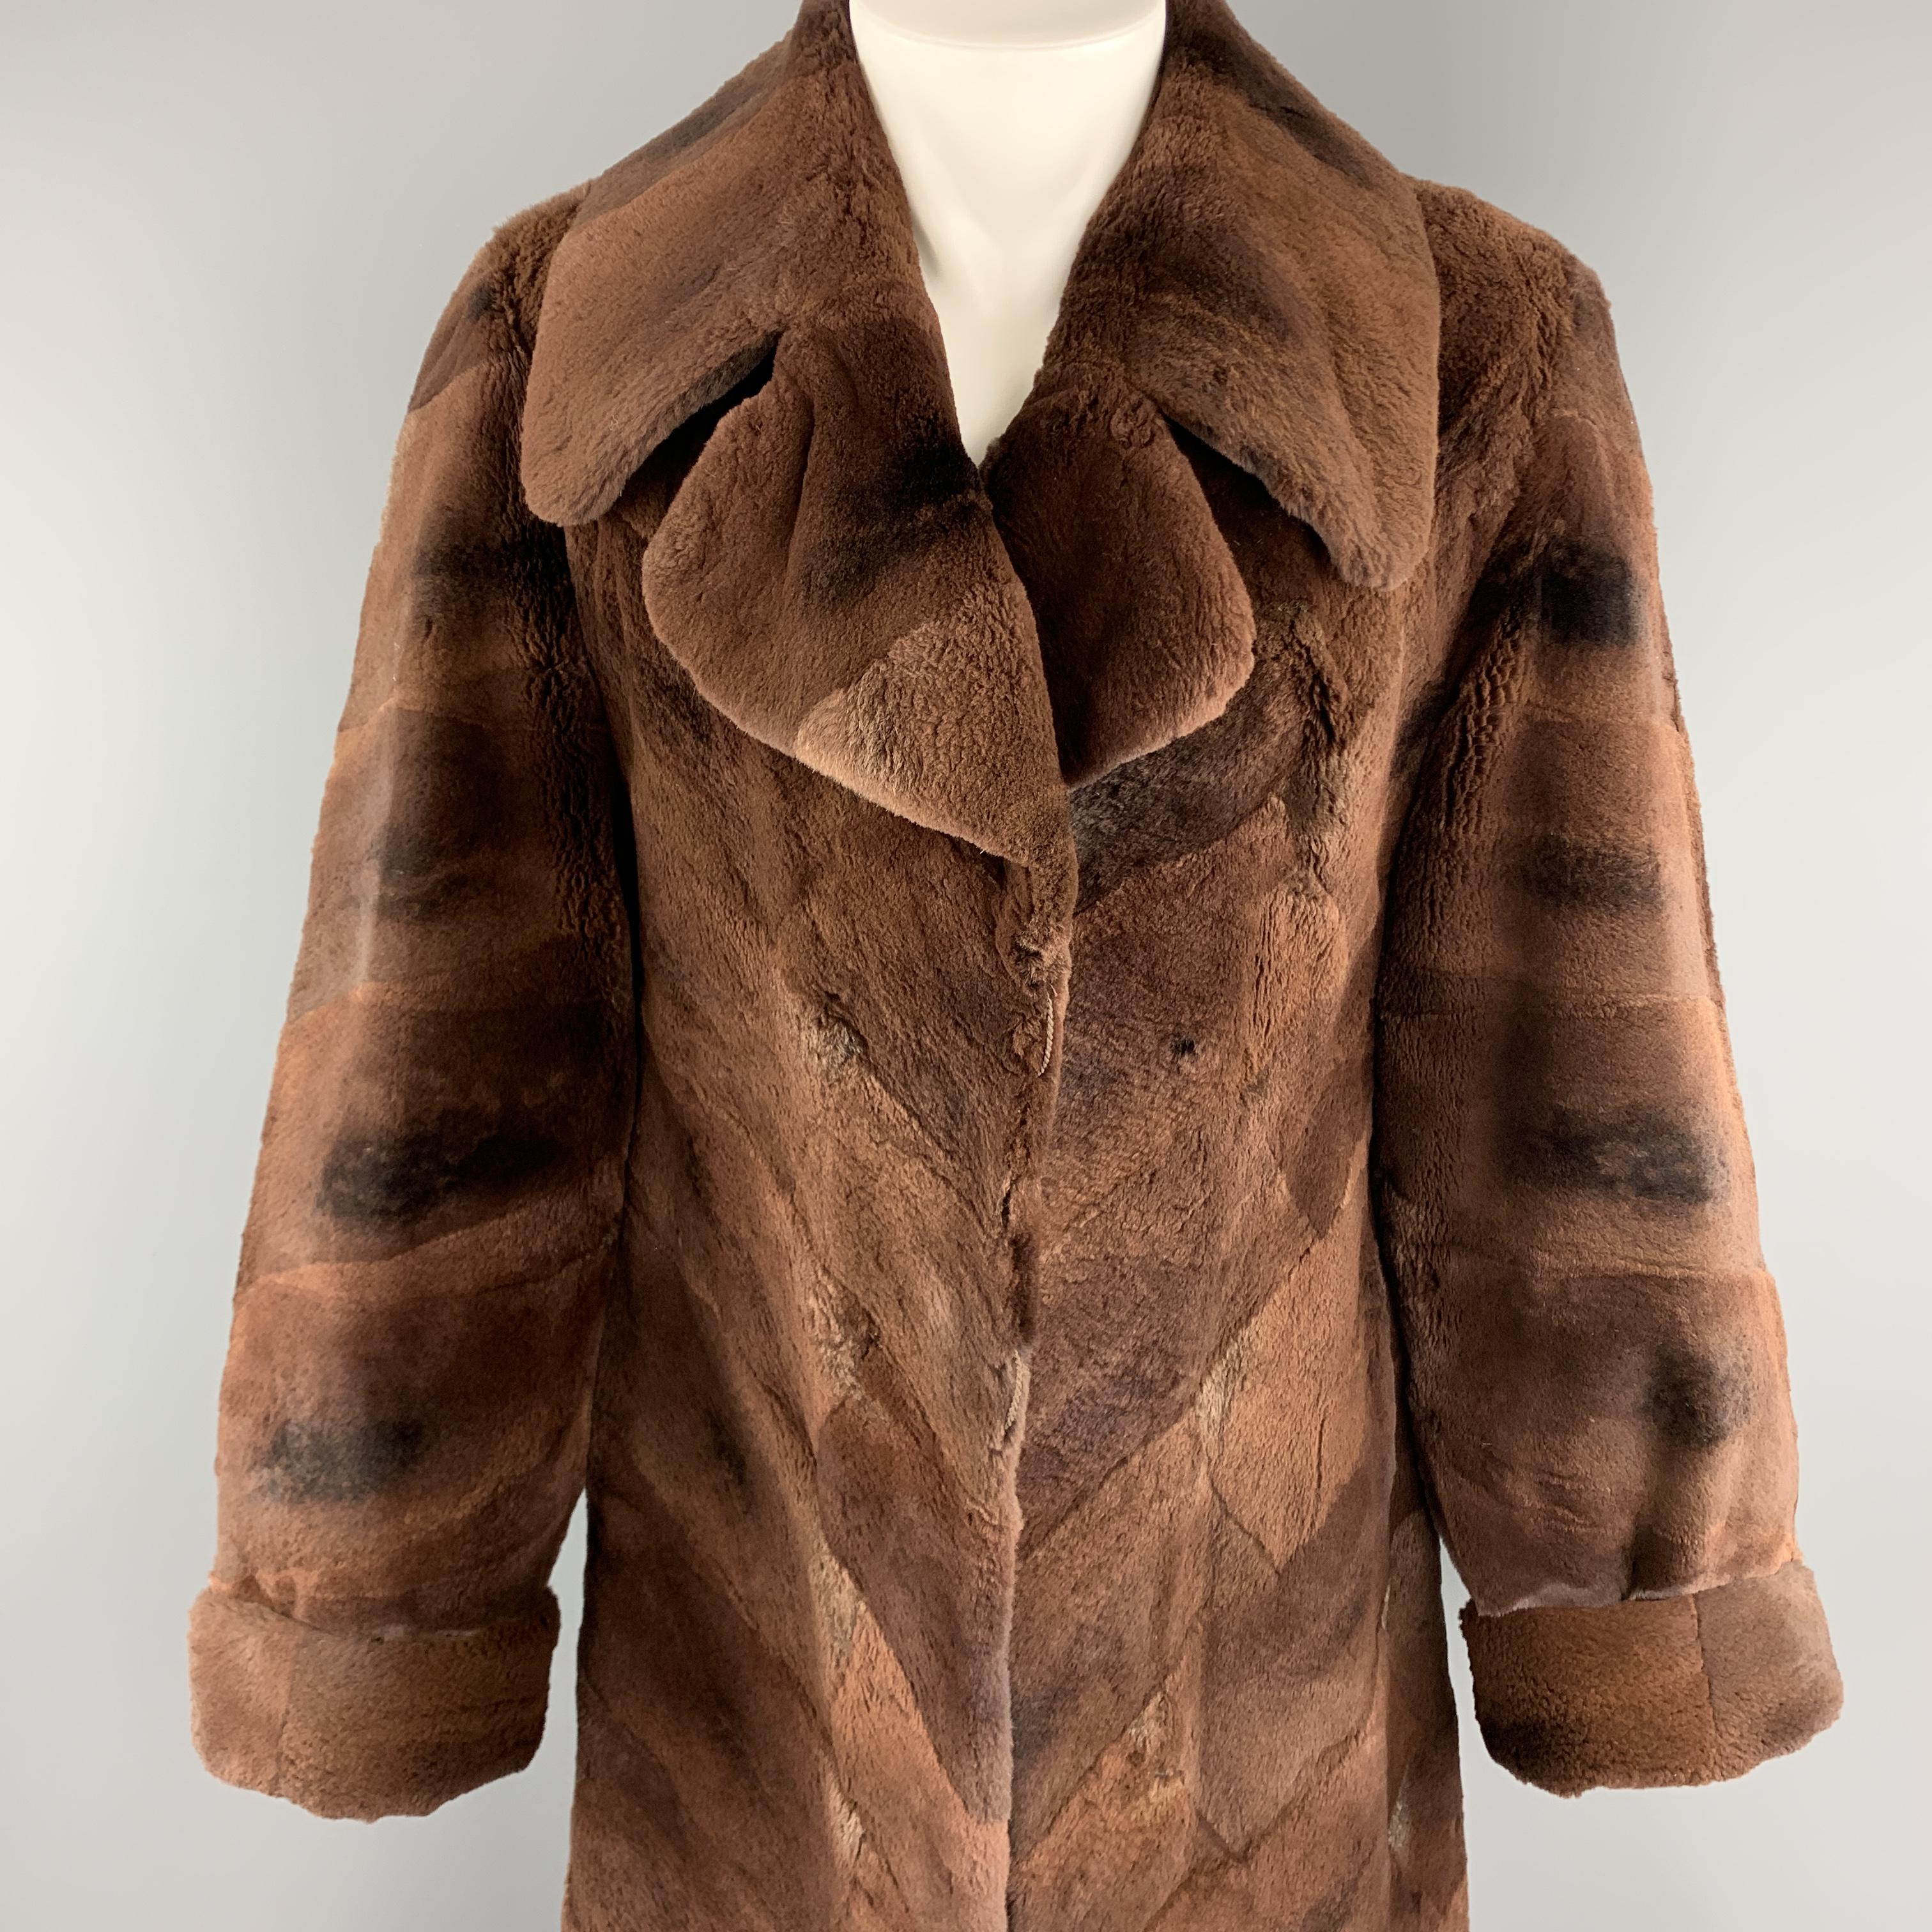 Vintage ZUKI for NEIMAN MARCUS fur coat comes in geometrical placed dyed muskrat fur with a pointed collar lapel, cuffed sleeves, slit pockets, and printed liner. Buttons have been removed. As-is. Made in Canada. 

Very Good Pre-Owned